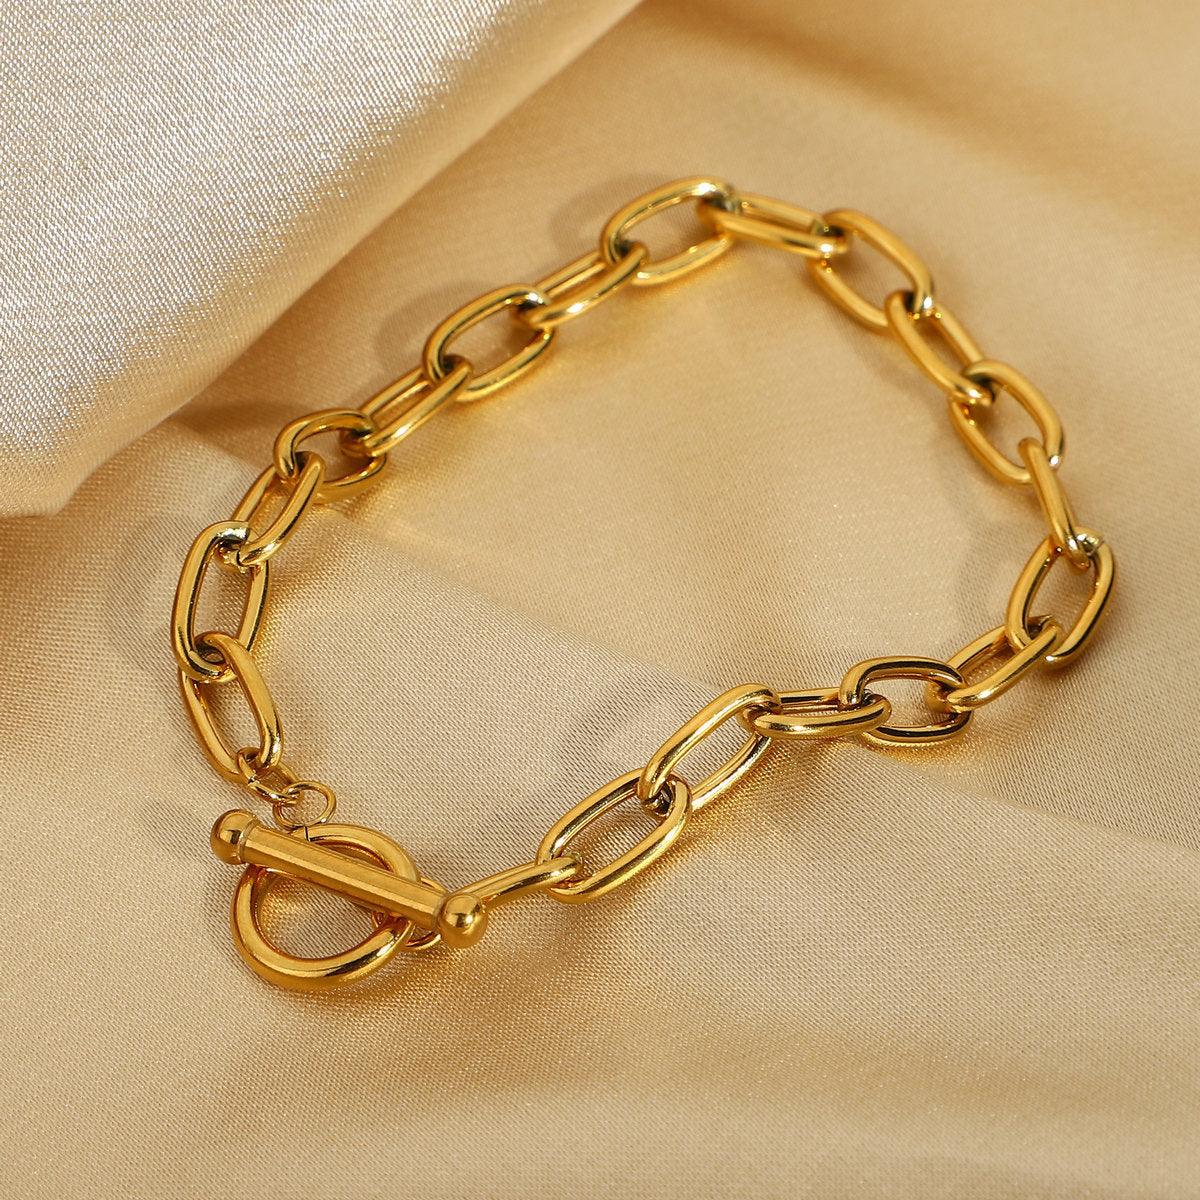 B9.OT Ring Gold Plated Stainless Steel Oval Bracelet - Elle Royal Jewelry